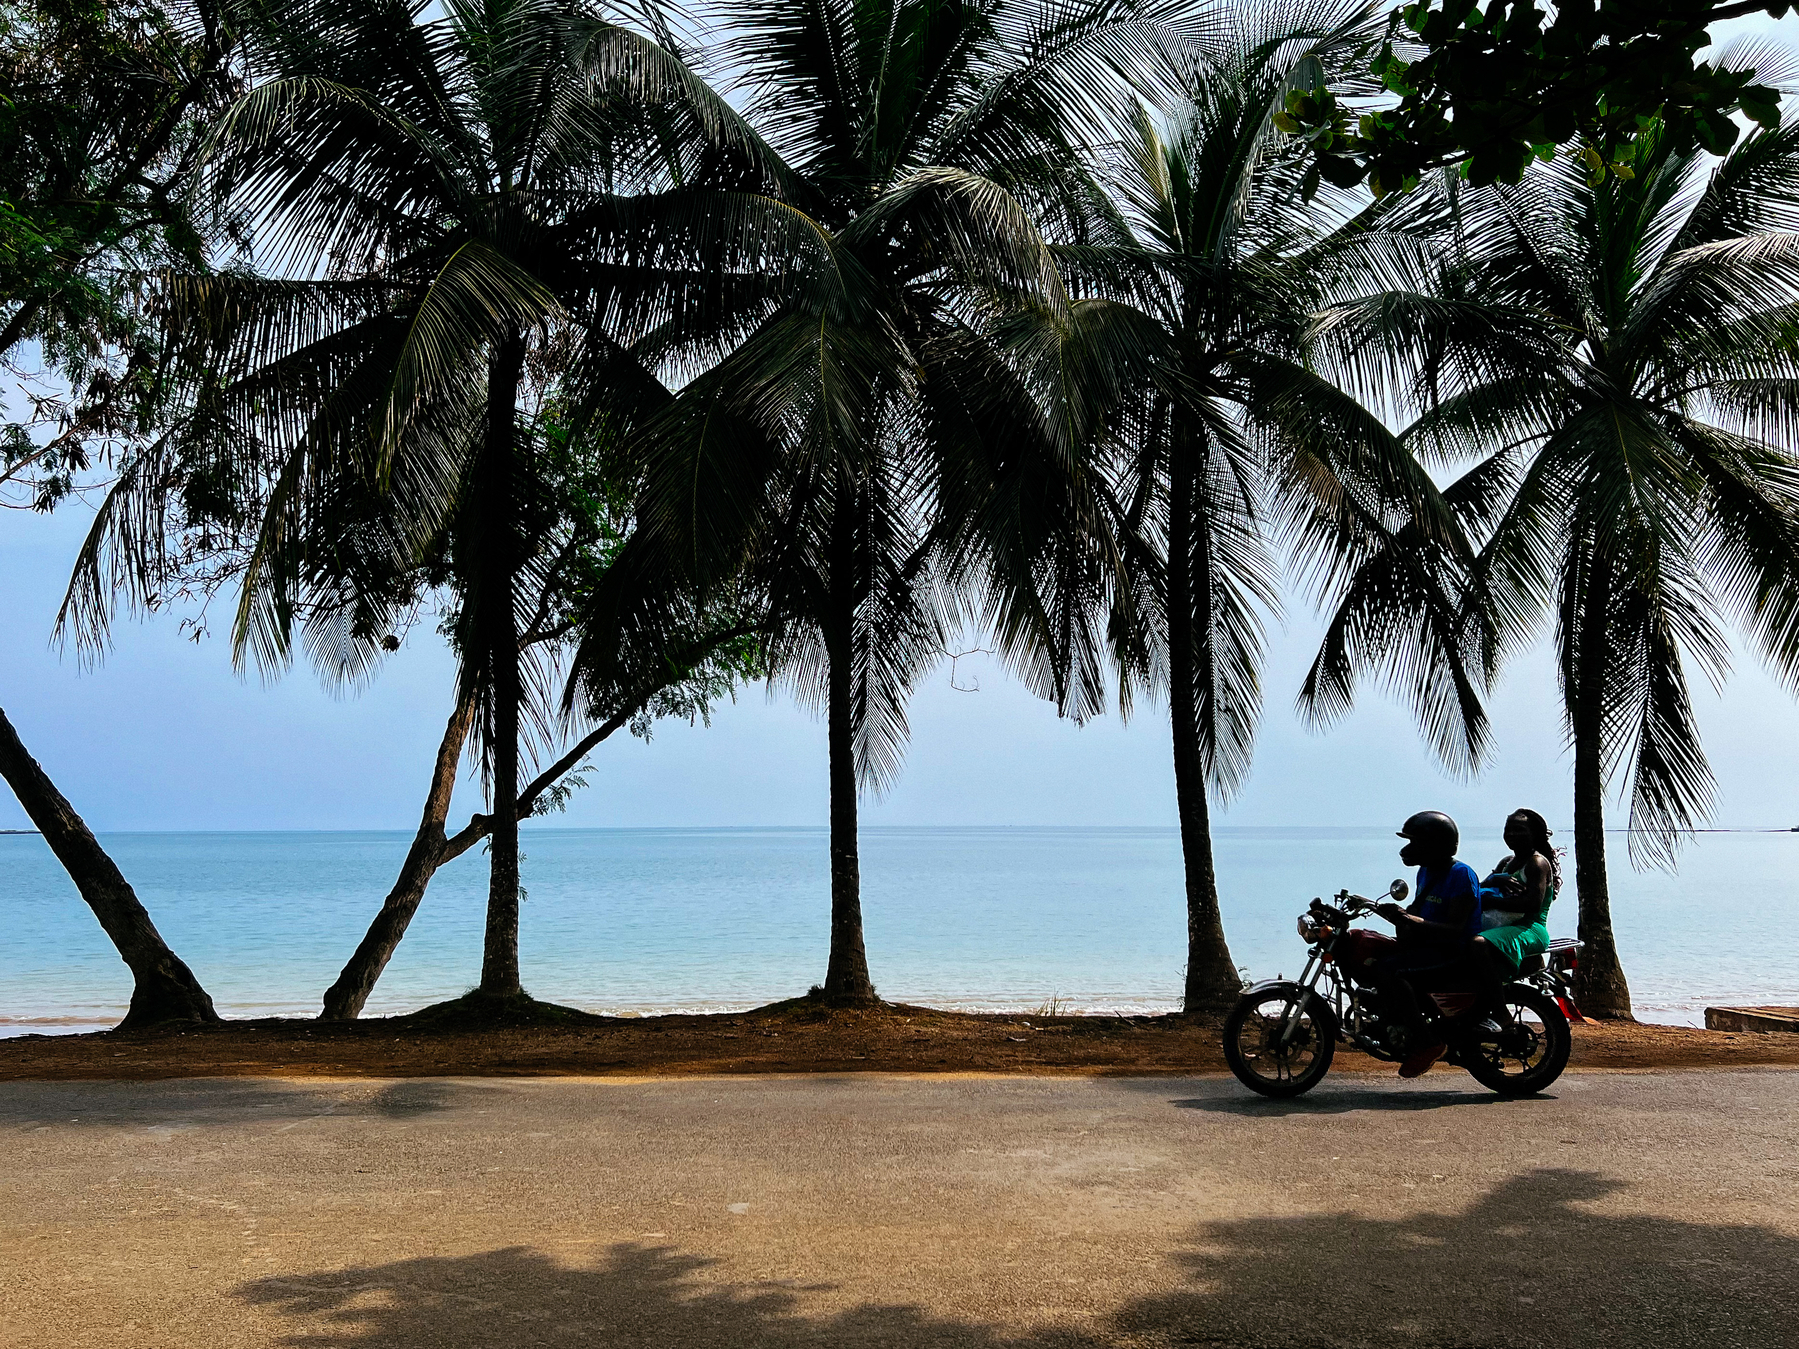 A motorcycle rides close to the sea. Palm trees line the beach. 